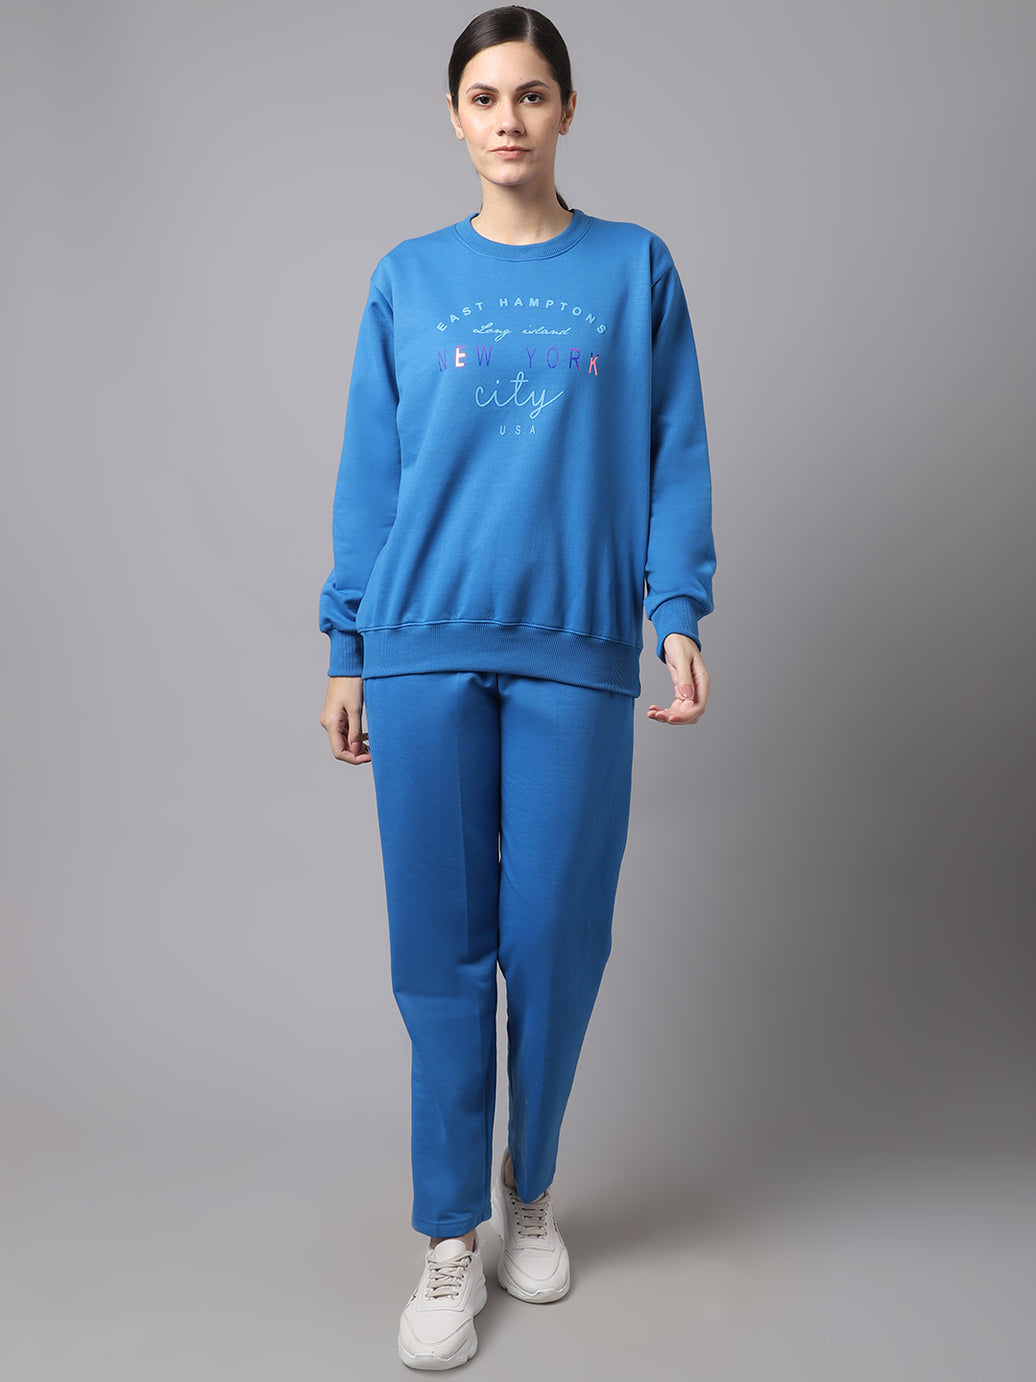 Hosiery XL Clothink India Animal Print Women Woolen Track Suits (SKYBLUE)  at Rs 799/piece in New Delhi